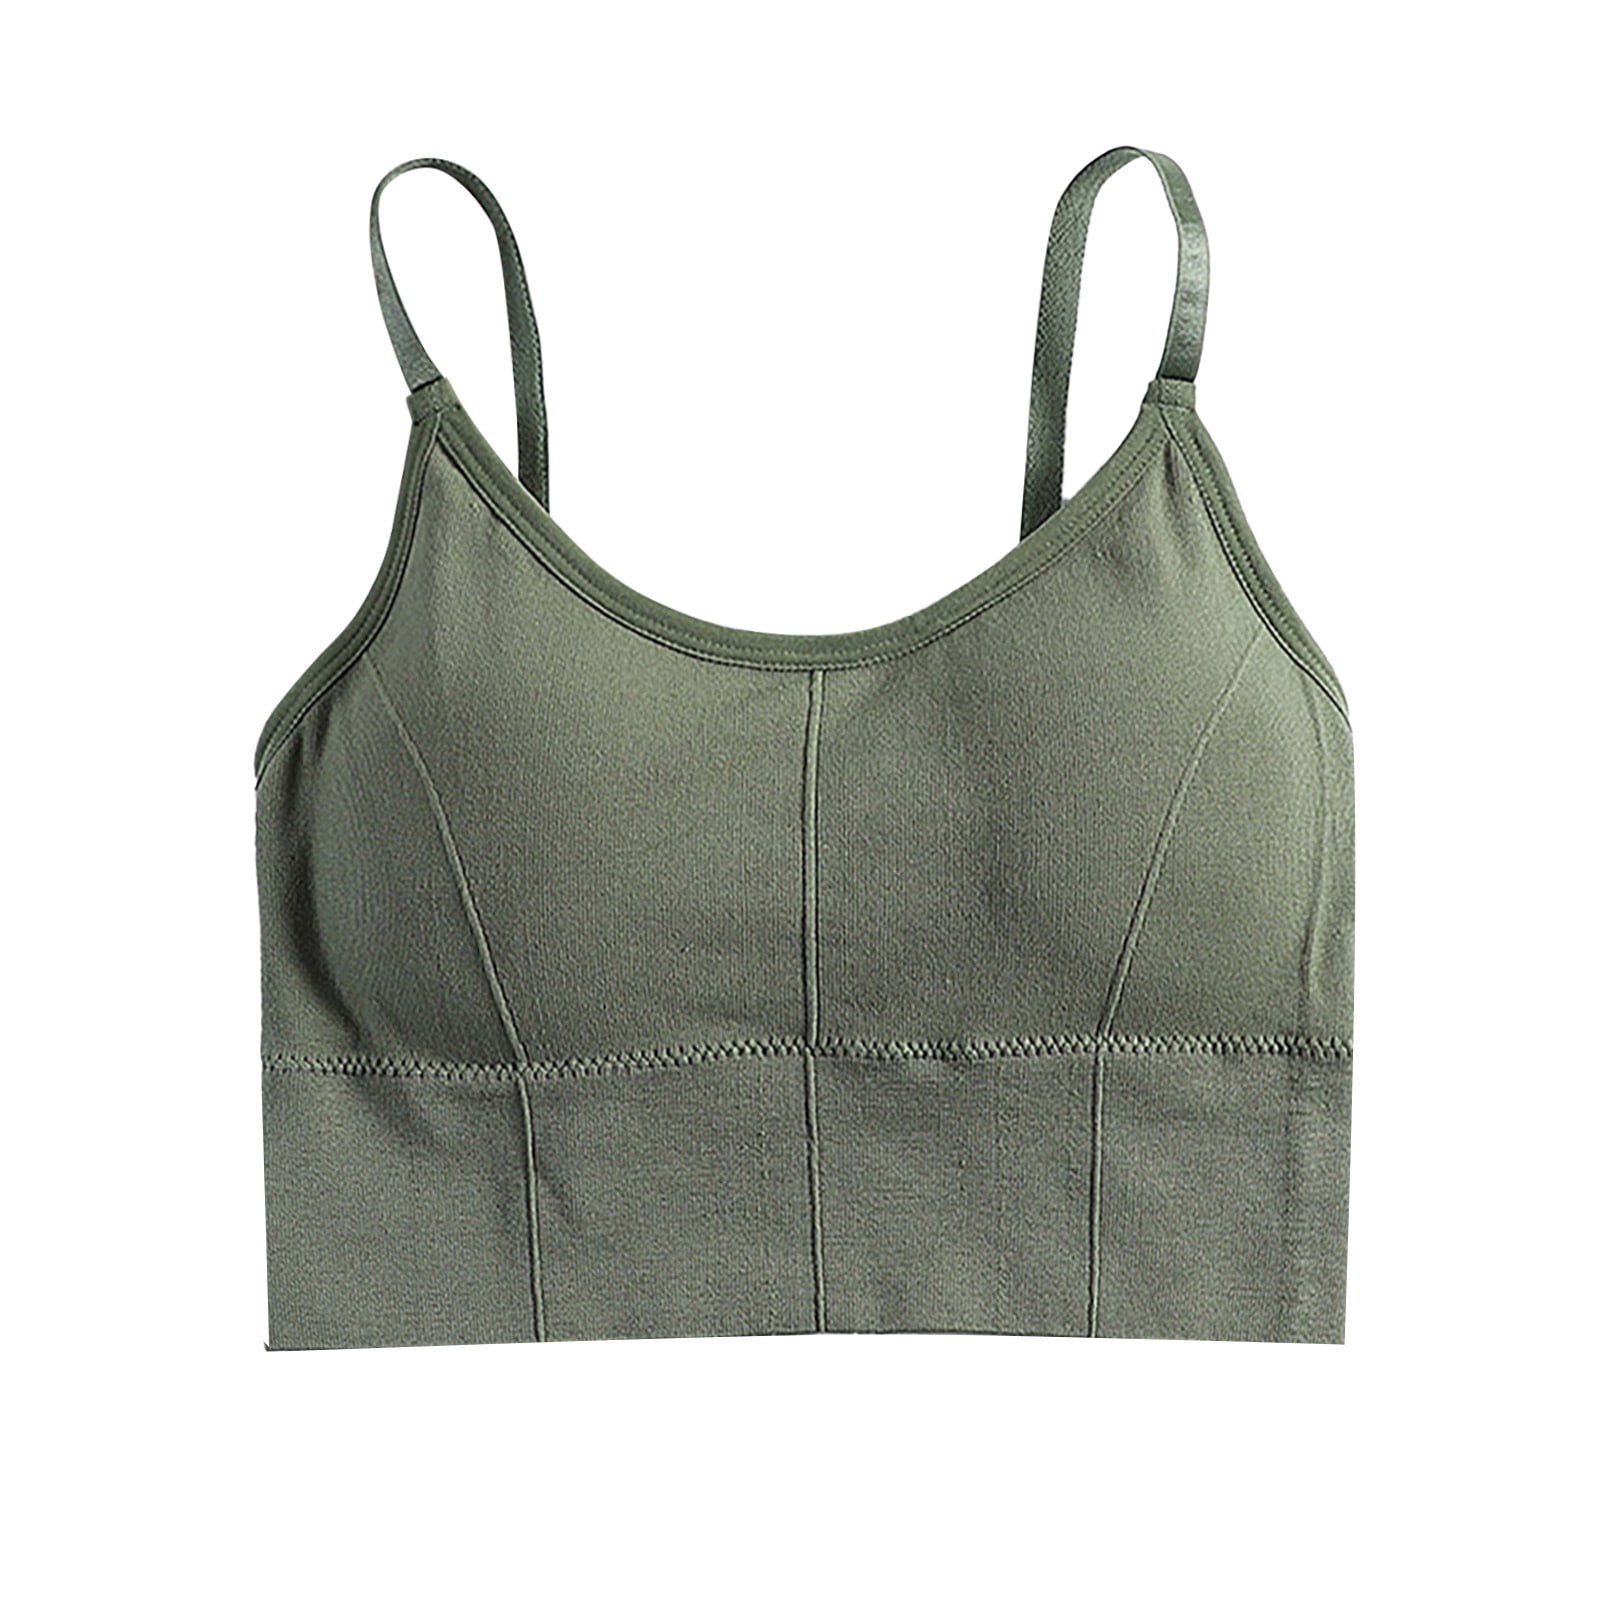 Women's Workout Seamless Sports Bras Tank With Built In Bra Tank Tops  Adjustable Strap Stretch Cotton Camisole With Built In Padded Shelf Bra  Small